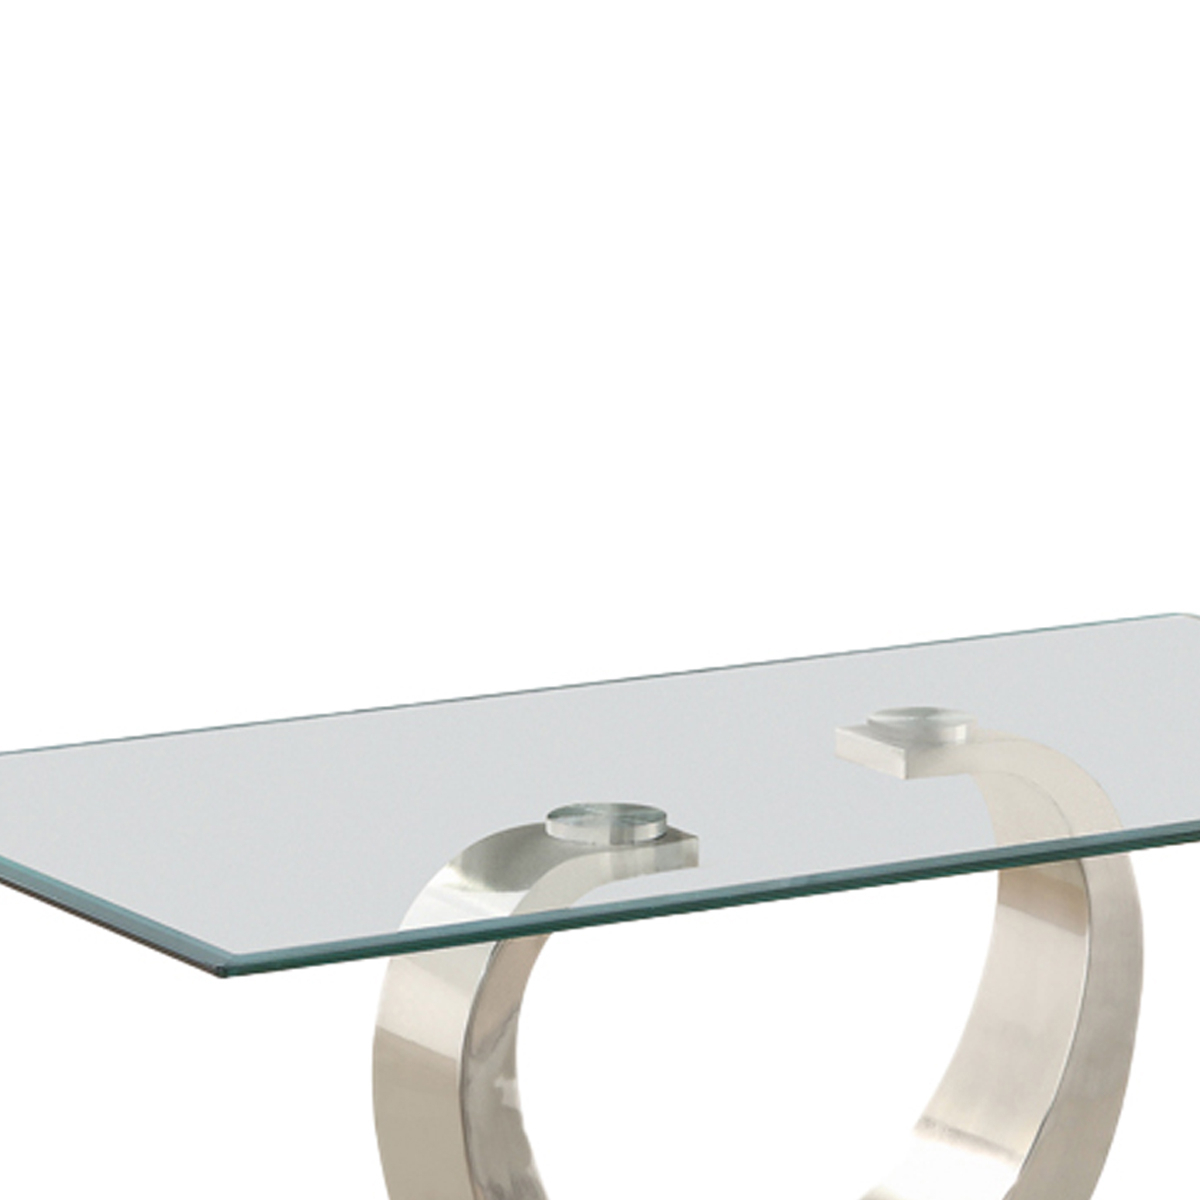 Floating Glass Top Coffee Table With Metal Support, Clear And Silver- Saltoro Sherpi